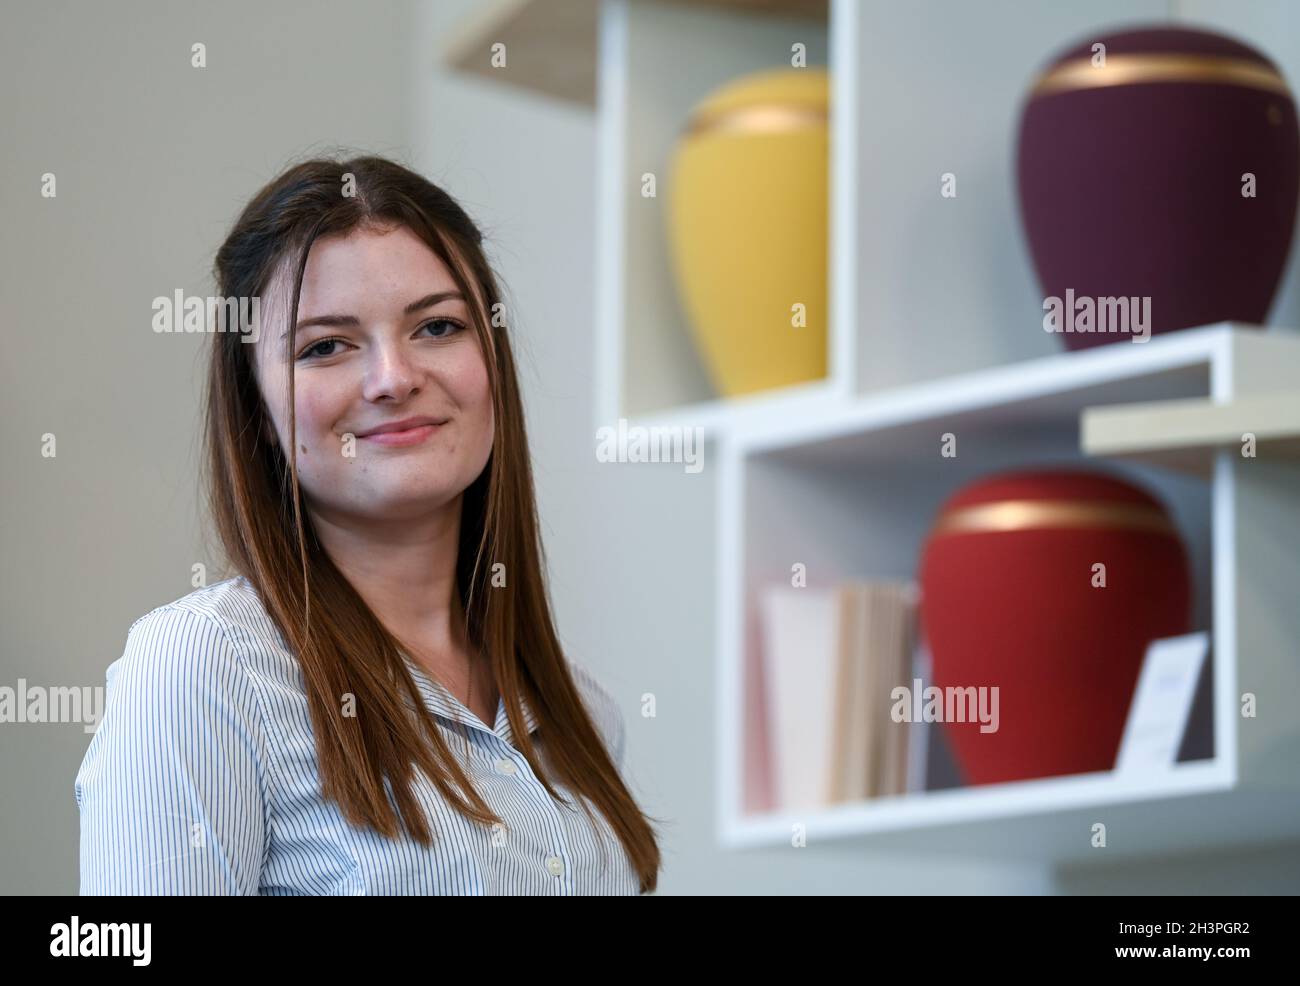 Leipzig, Germany. 18th Oct, 2021. Paula Meißner stands in front of various urns in a consultation room at Ananke Funerals. As a prospective office administrator, Paula is in her second year of training at the funeral home. According to industry sources, funeral homes have no problems finding young talent. (to dpa 'Popular profession: funeral homes have no worries about finding new recruits') Credit: Hendrik Schmidt/dpa-Zentralbild/dpa/Alamy Live News Stock Photo